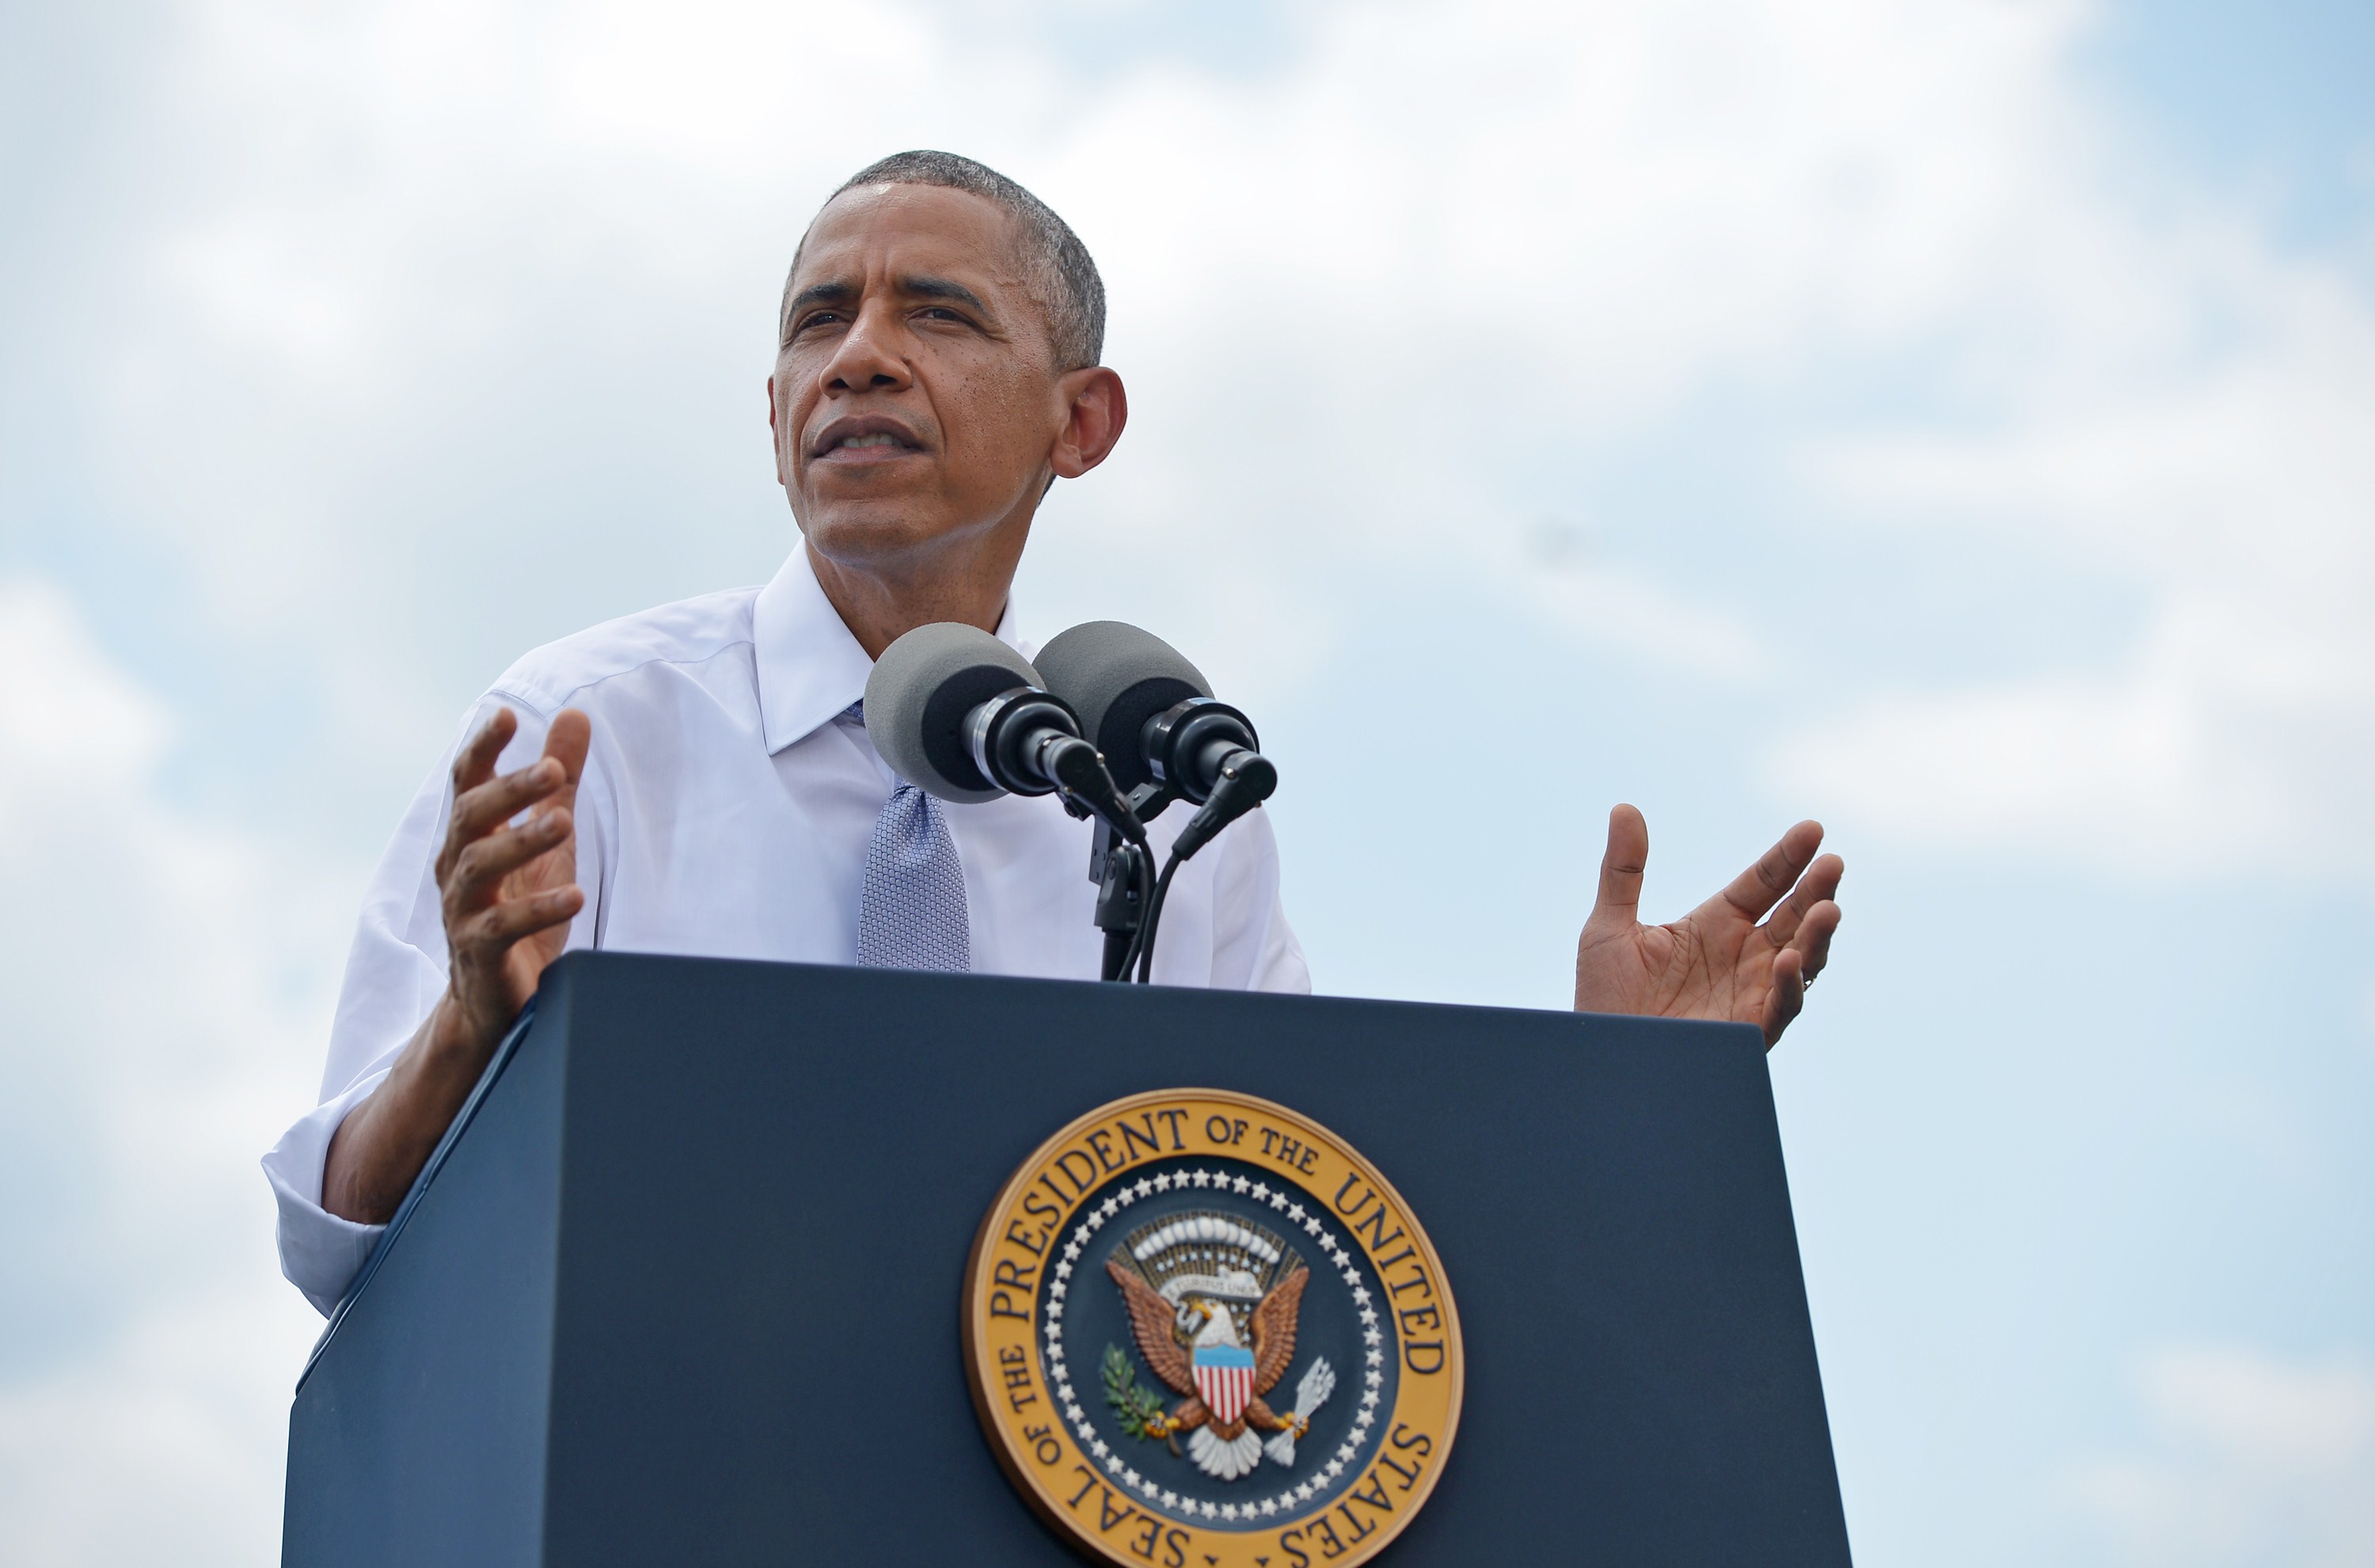 U.S. President Barack Obama speaks on the economy in Georgetown Waterfront Park on July 1, 2014 in Washington. (Mandel Ngan—AFP/Getty Images)